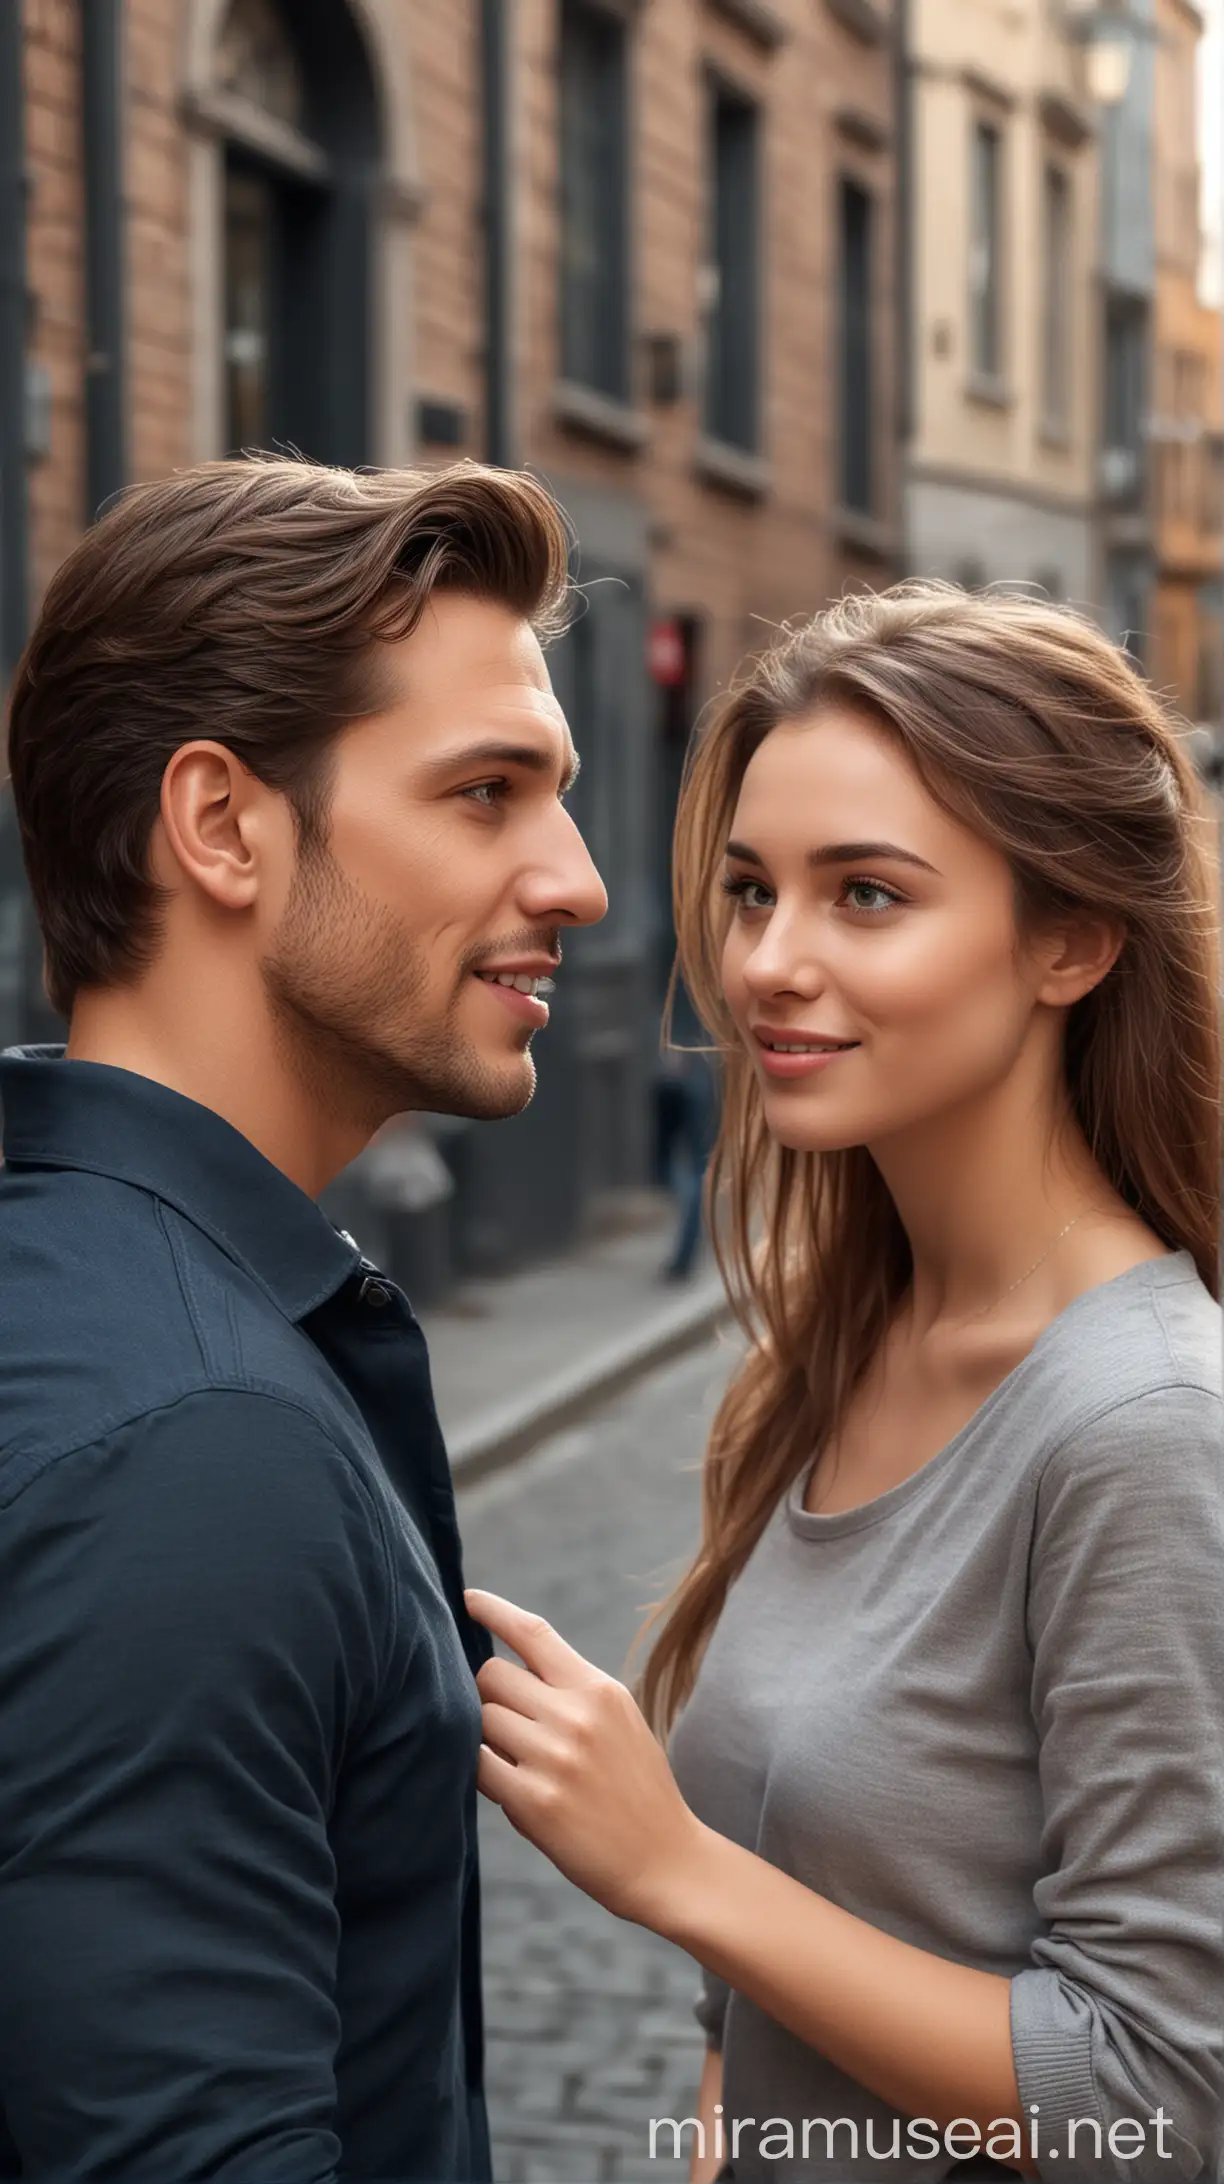 Confident Man Engaging in Conversation with Beautiful Woman on Urban Street